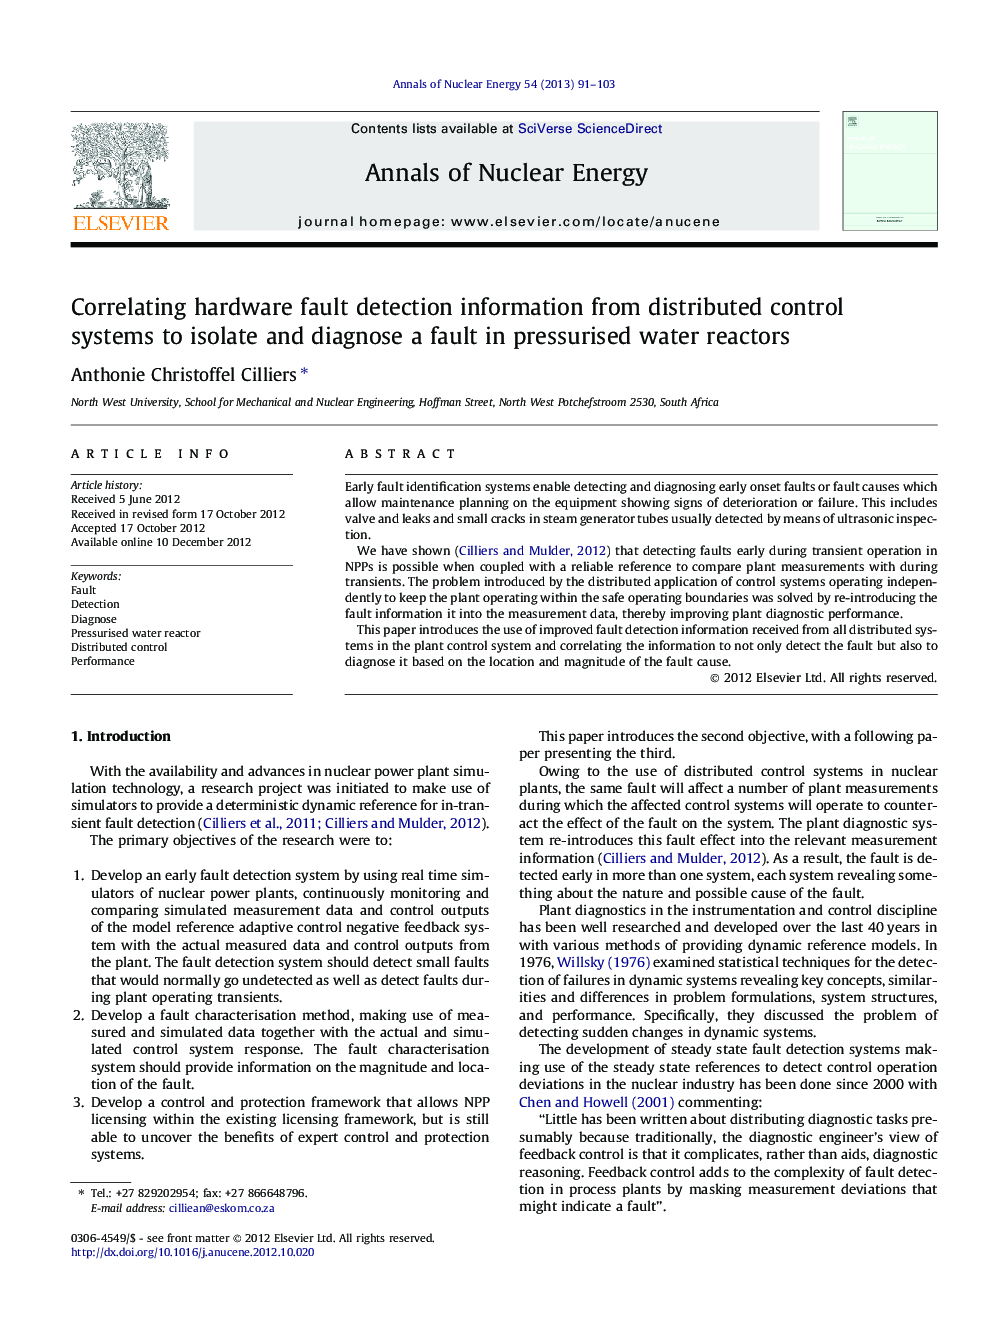 Correlating hardware fault detection information from distributed control systems to isolate and diagnose a fault in pressurised water reactors